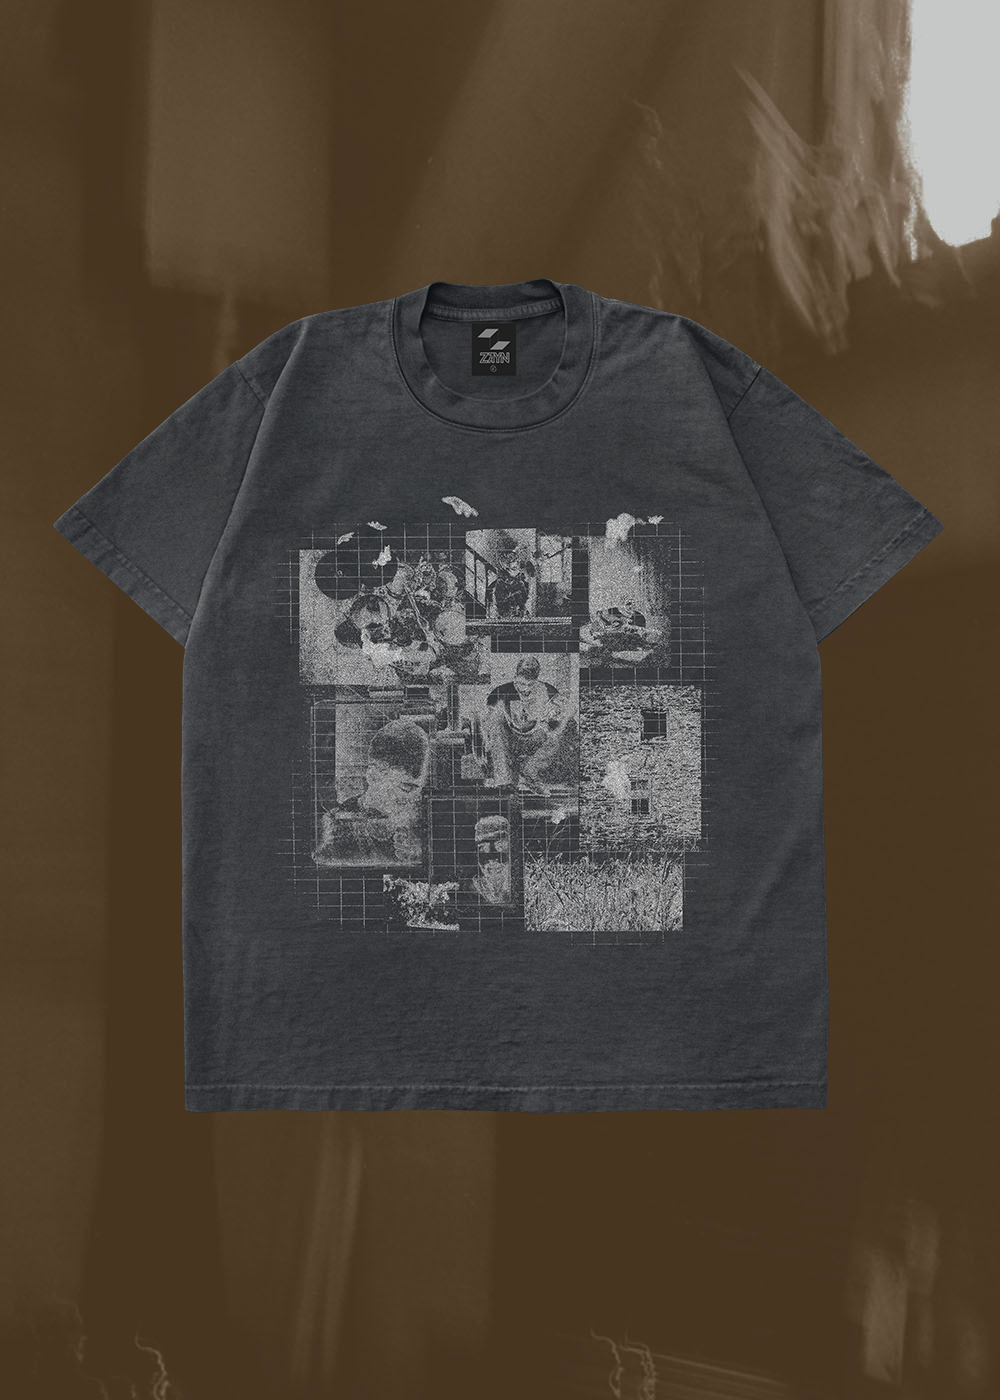 Zayn - ROOM UNDER THE STAIRS STATIONHEAD EXCLUSIVE TEE